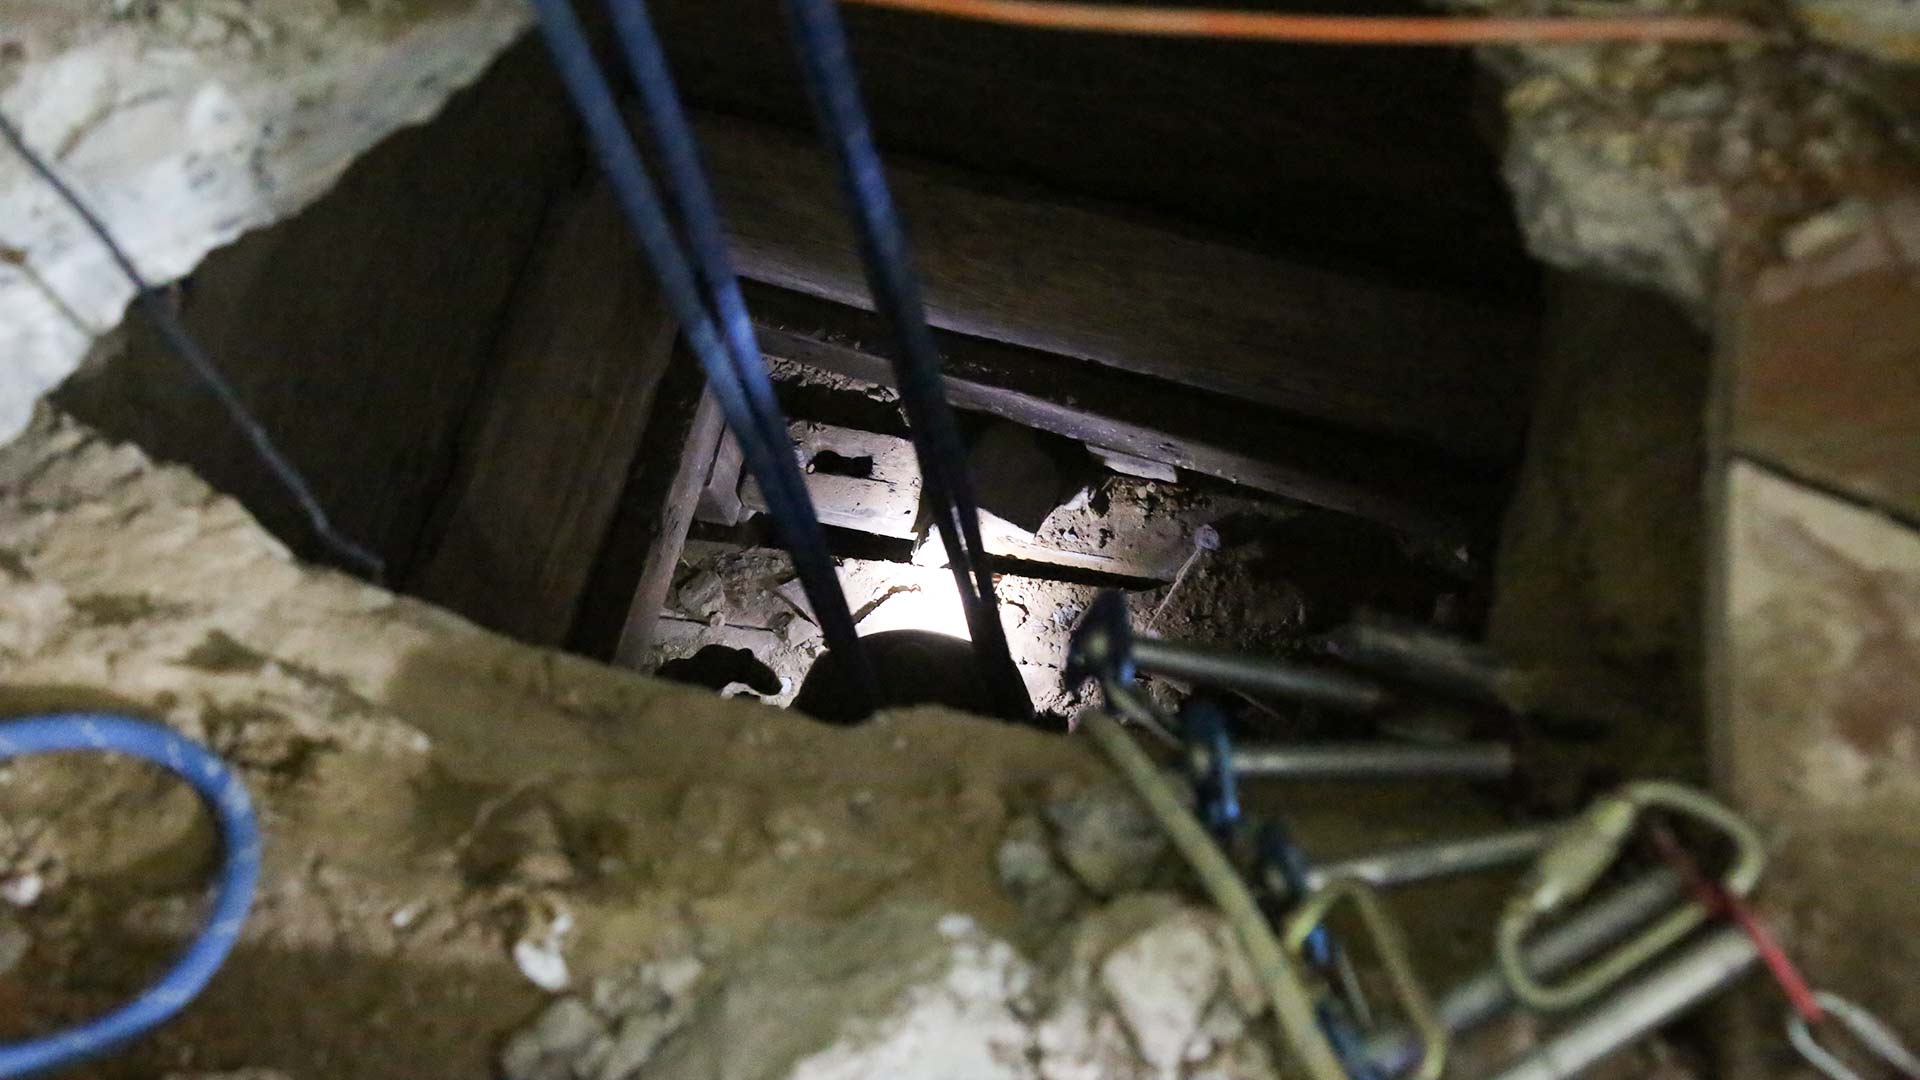 A team of specially trained agents were called in to excavate the tunnel found in San Luis.